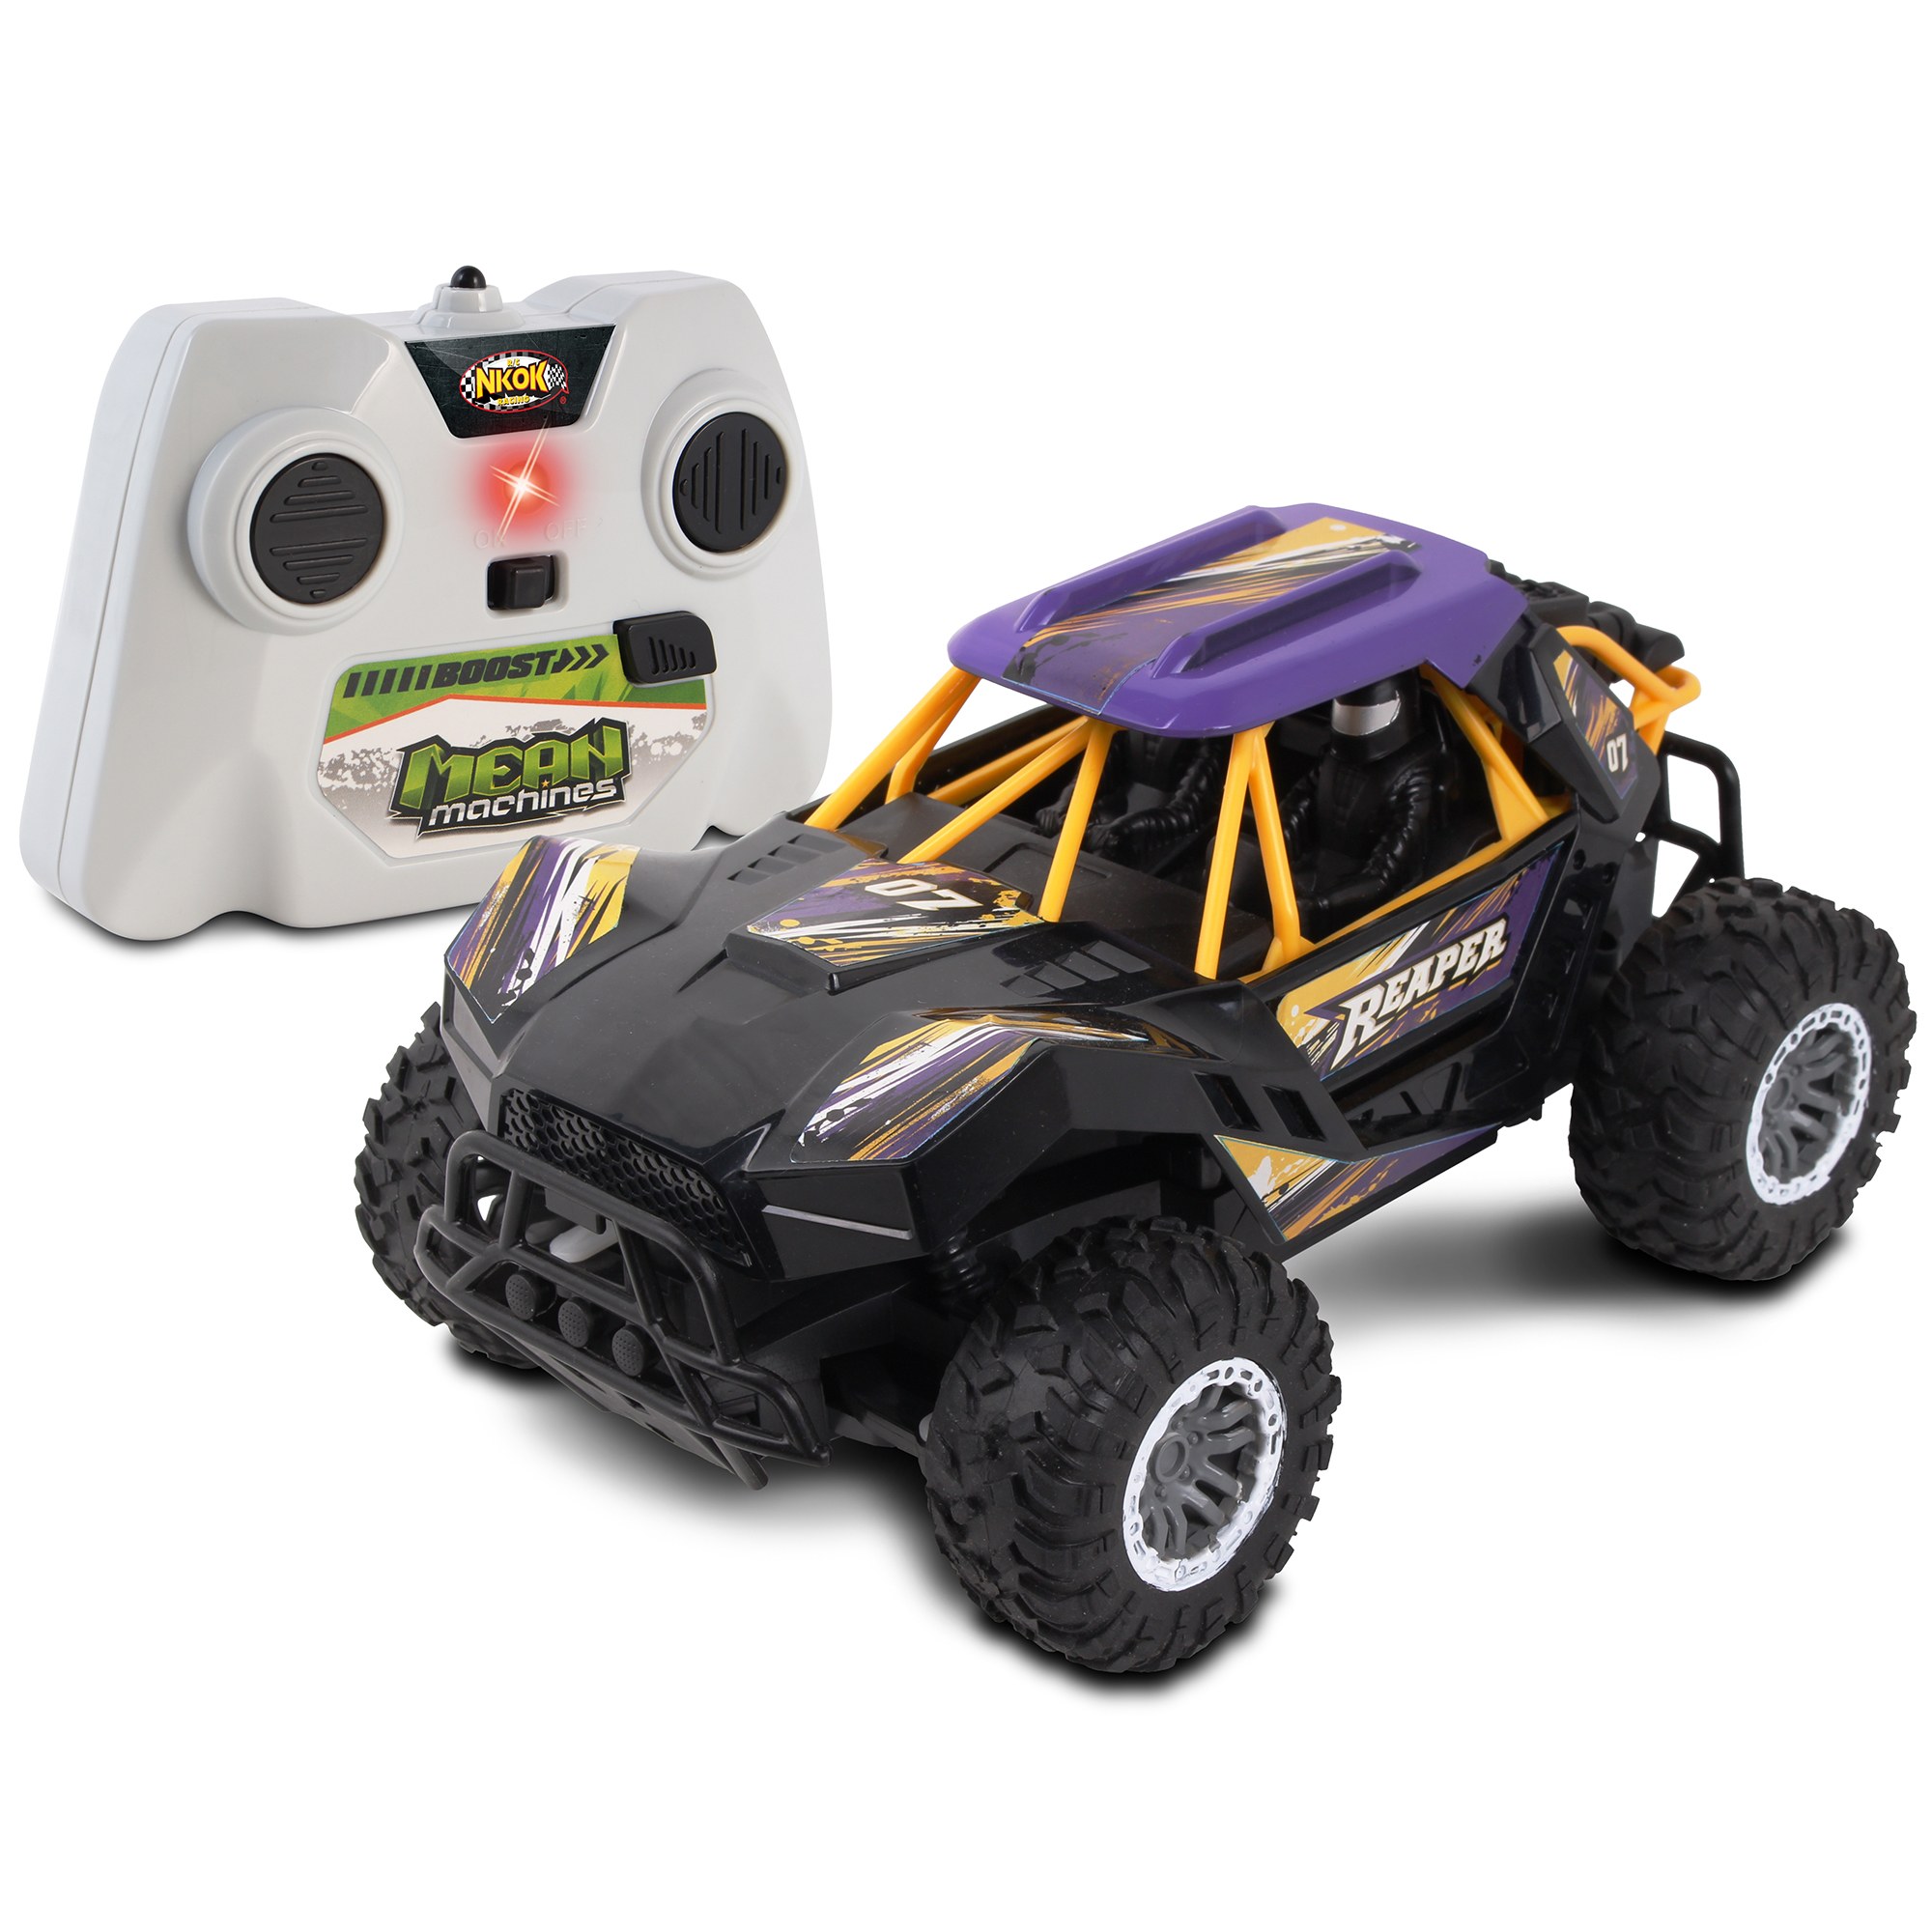 NKOK Mean Machines: 2.4 GHz RC Reaper Baja Truck Radio Controlled  #81802, With Turbo Boost, Purple  Yellow, Full Function RC, Off Roading  Racer, Ages 6+